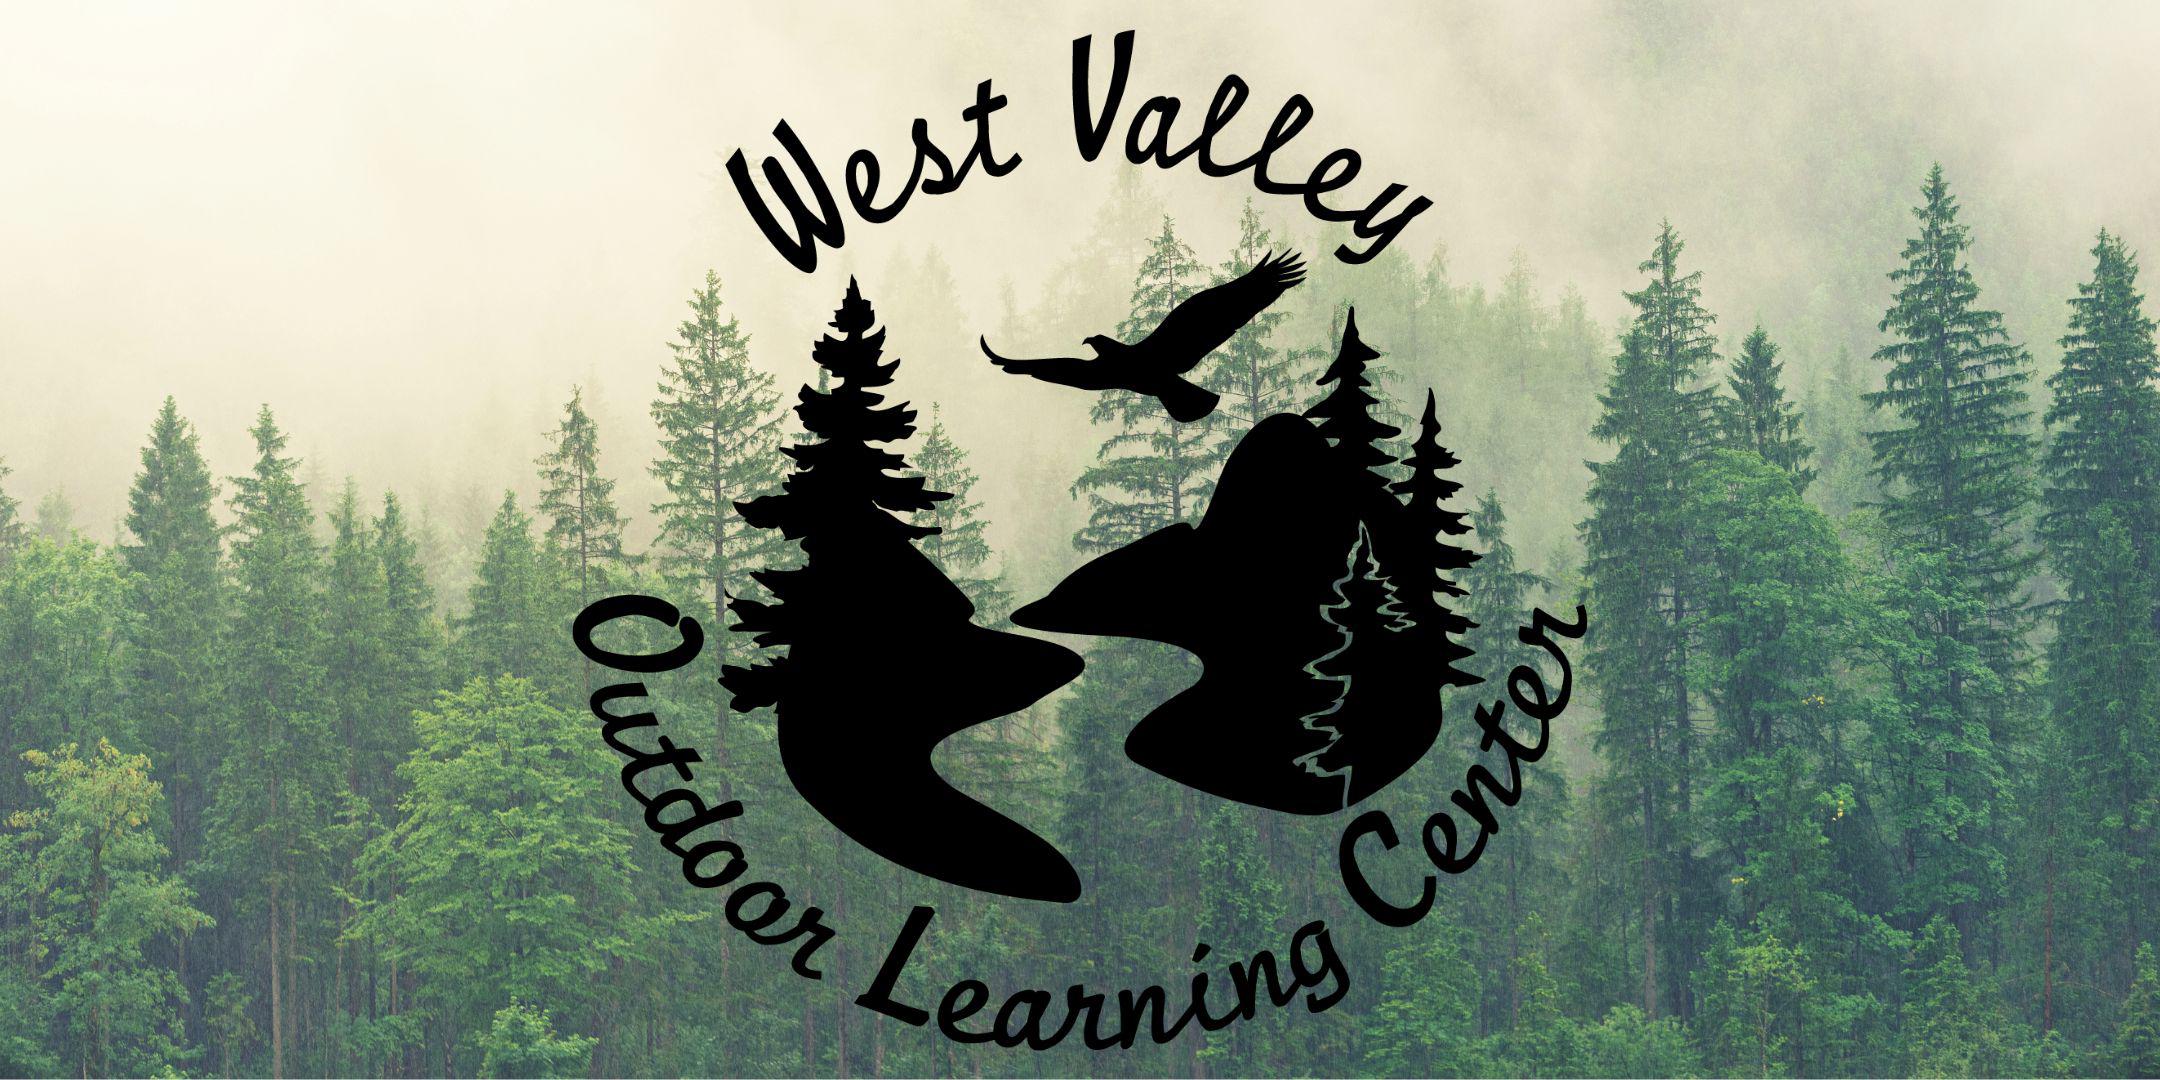 outdoor learning center clipart